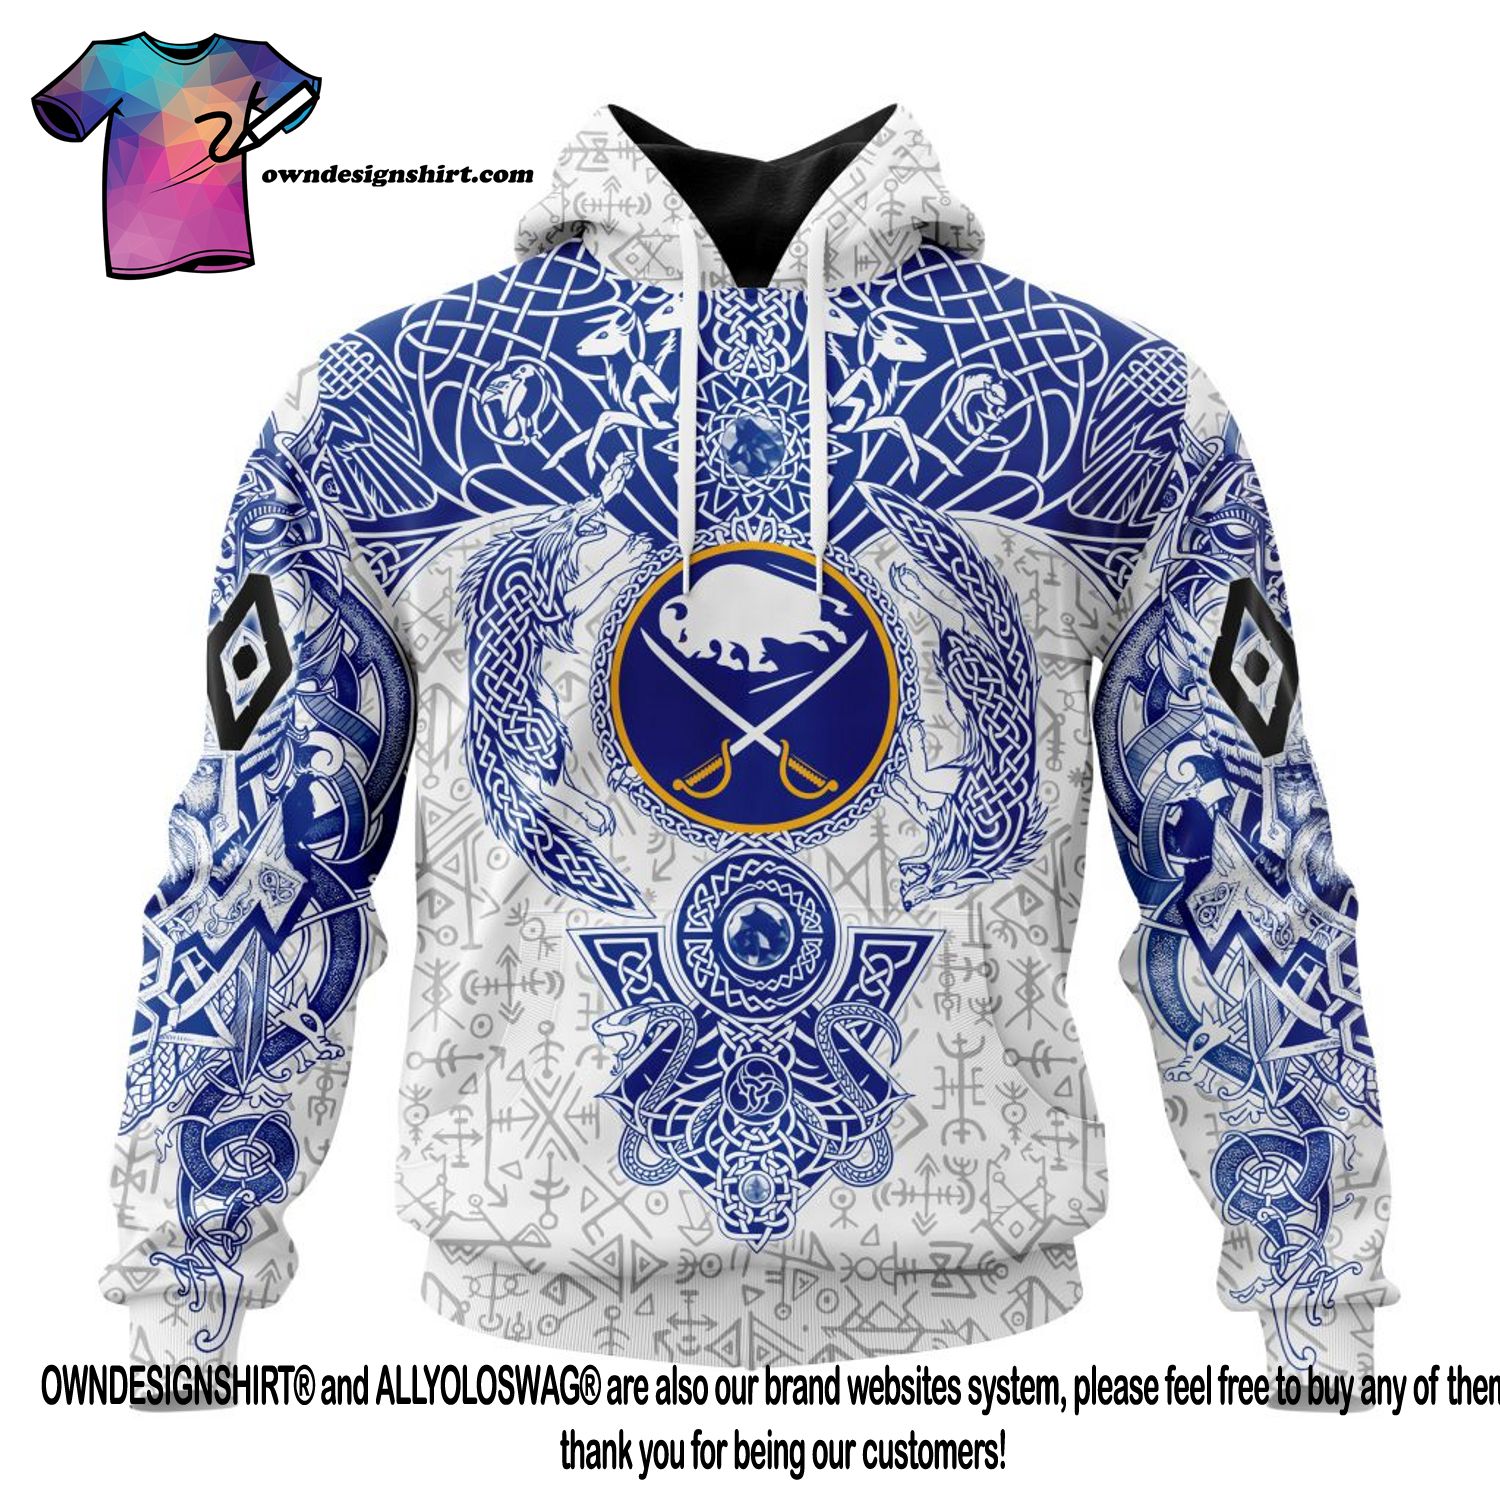 Buffalo Sabres Christmas Sweater Superb Stitch Sabres Gifts - Personalized  Gifts: Family, Sports, Occasions, Trending